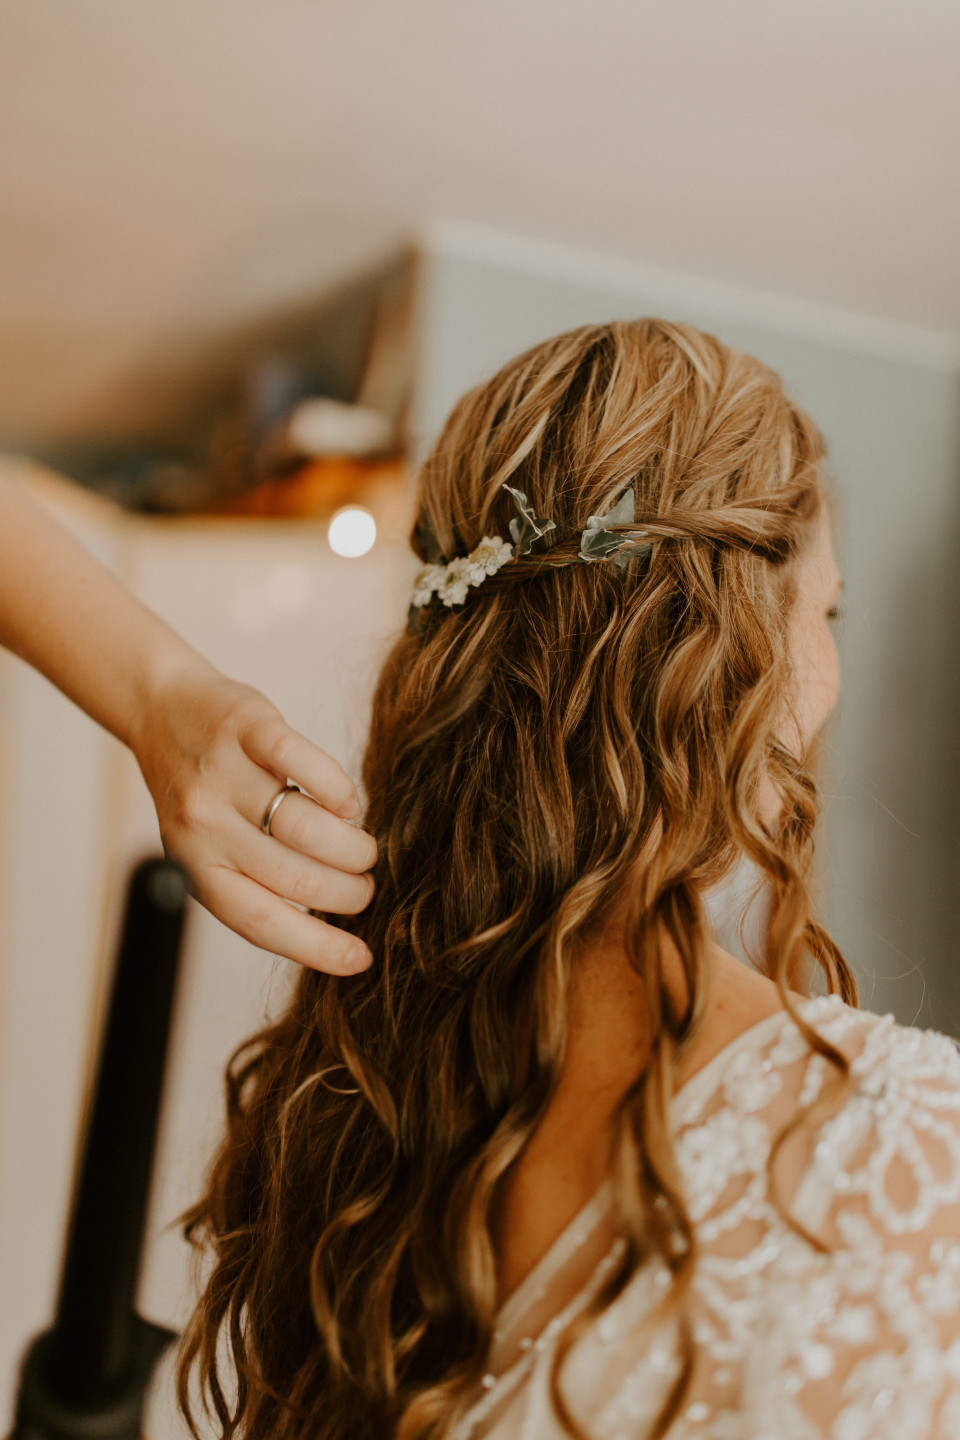 Hannah getting the final touches in Corvallis, Oregon. Intimate wedding photography in Corvallis Oregon by Sienna Plus Josh.